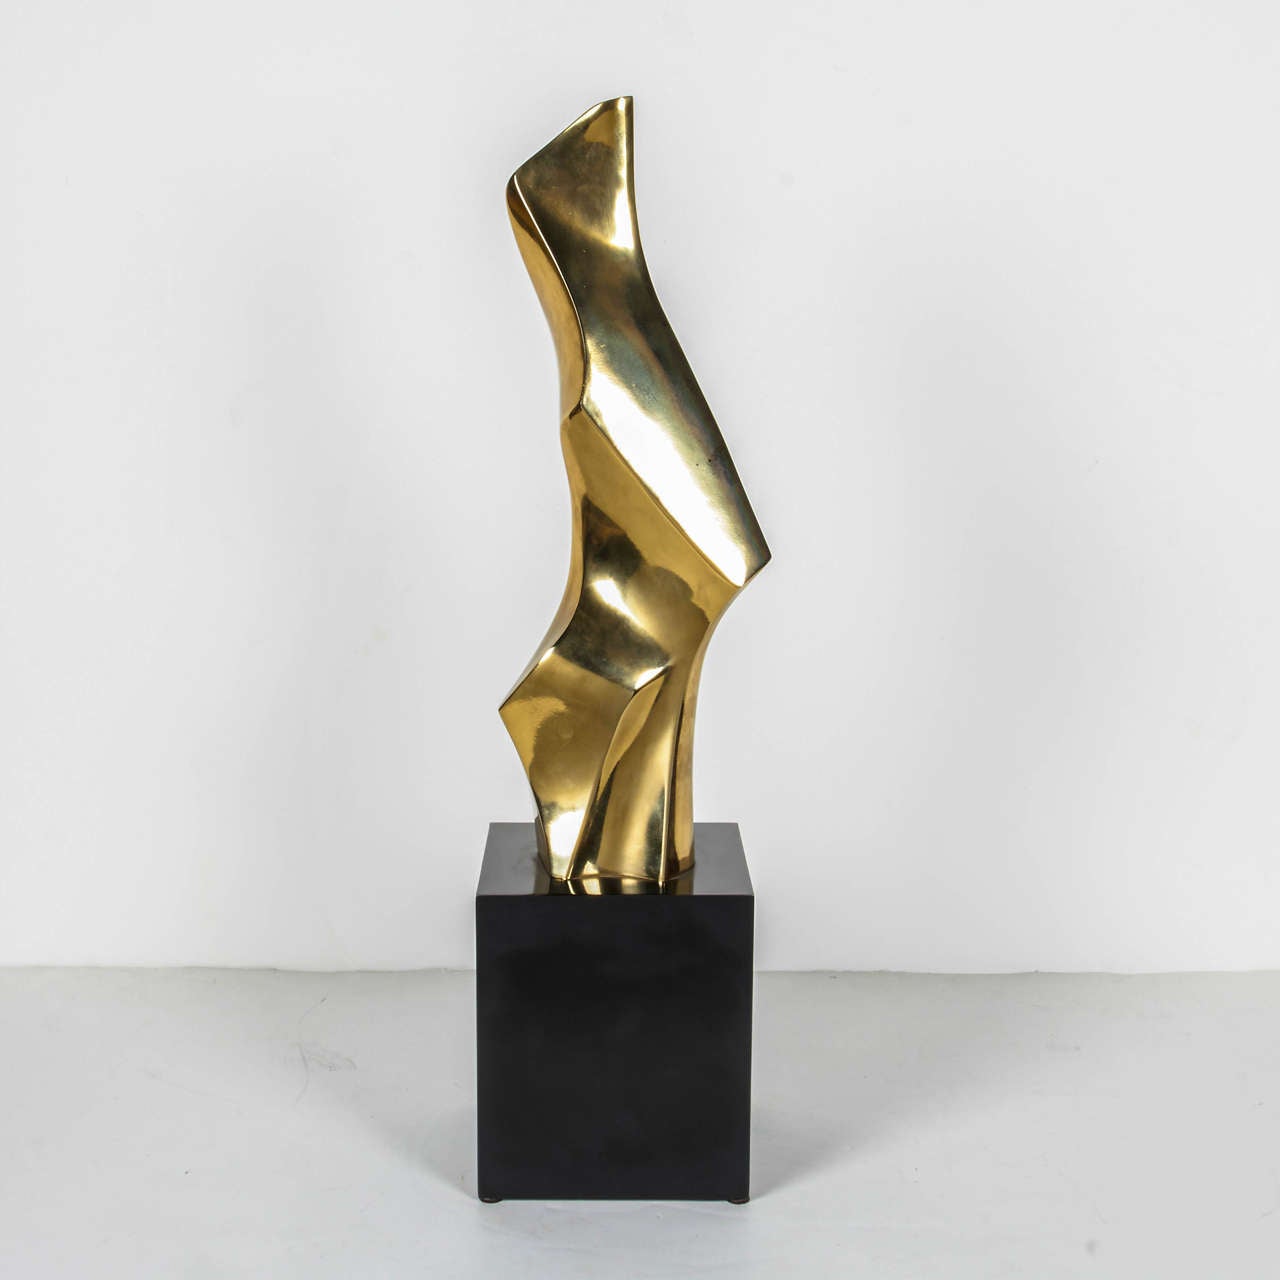 Brutalist abstract sculpture with amorphous form. The sculpture consists of polished brass free-form metal with black enameled cast metal pedestal base.